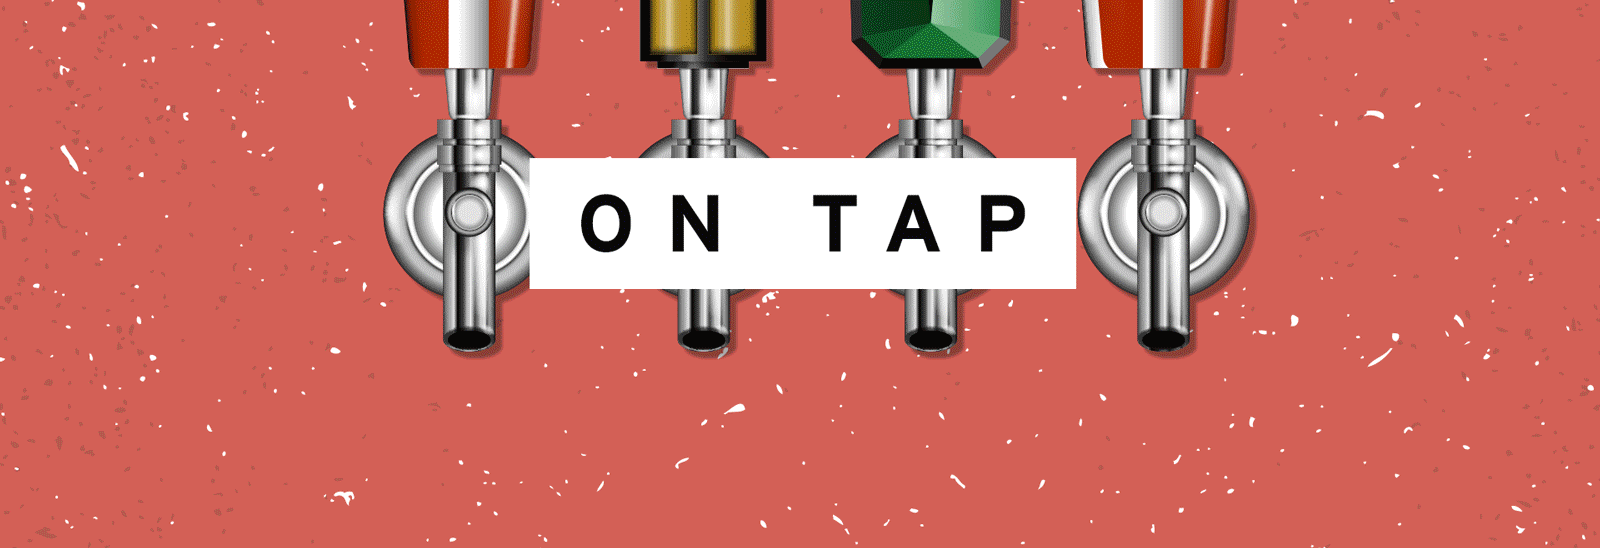 On tap at Sixty Million Postcards